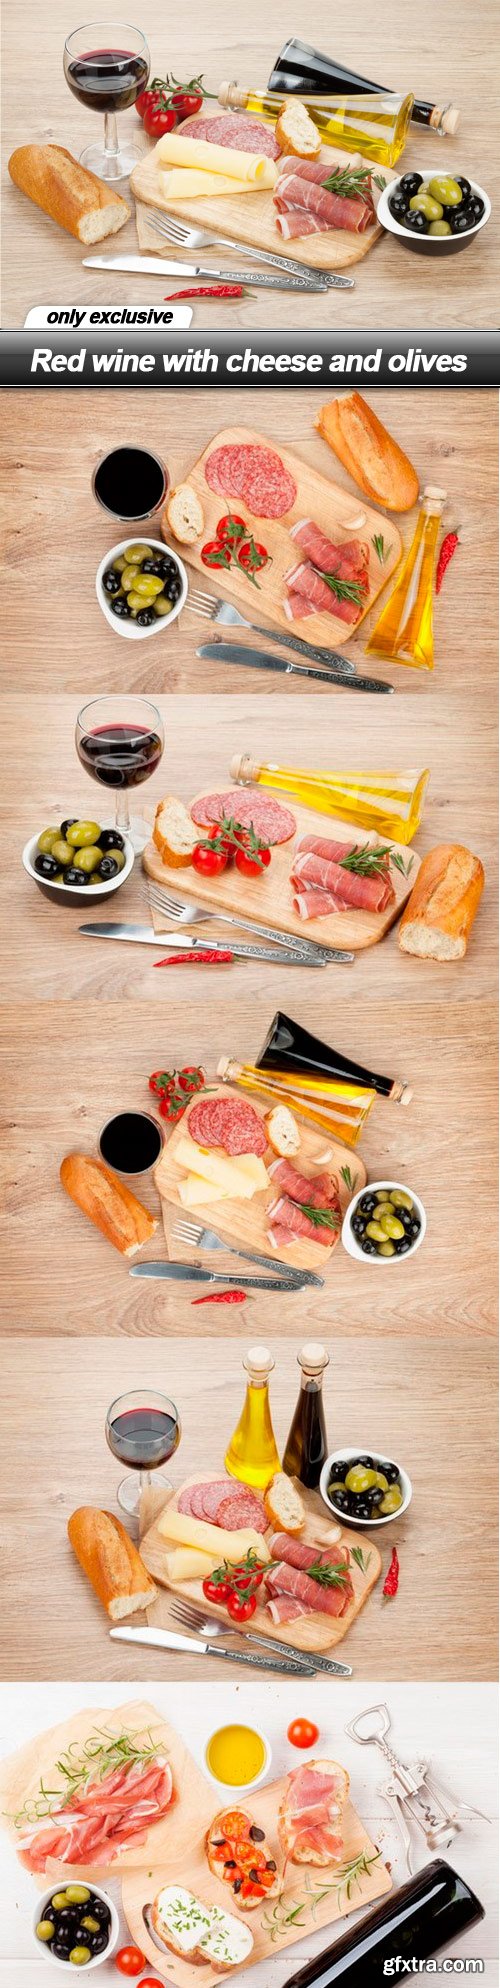 Red wine with cheese and olives - 6 UHQ JPEG